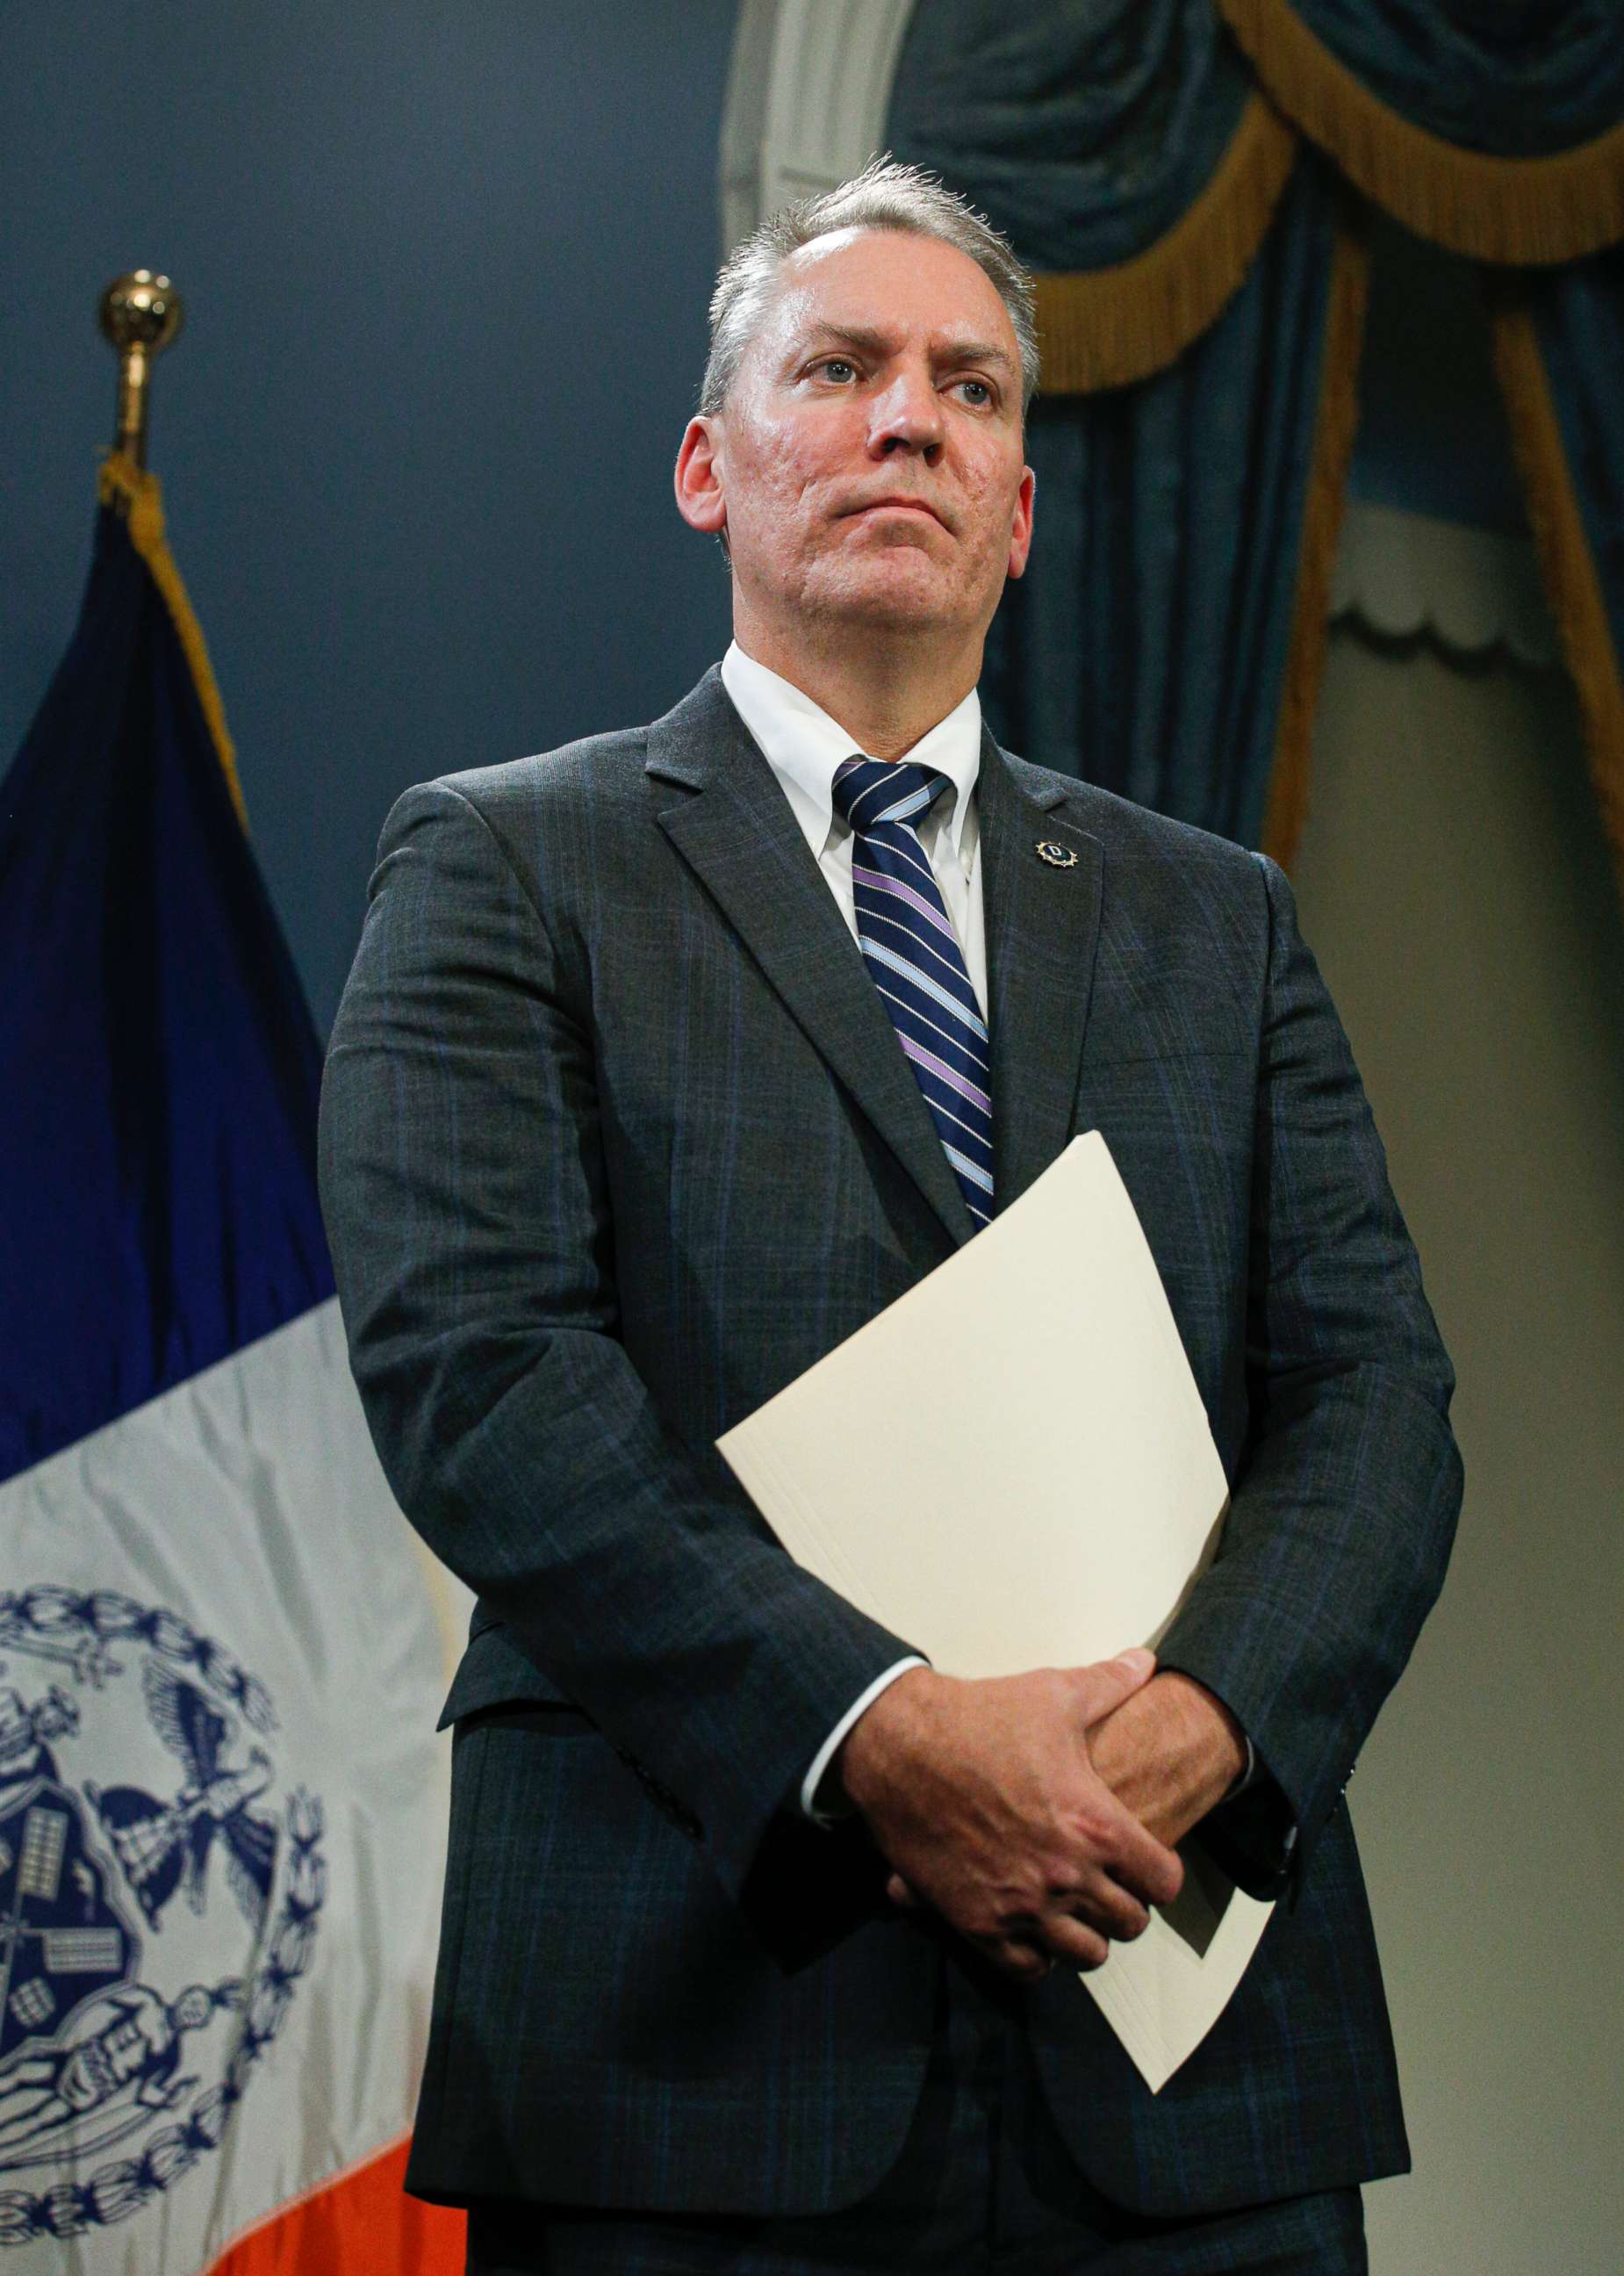 PHOTO: Dermot Shea attends a press conference announcing that will be the new NYPD Commissioner on Nov. 4, 2019, in New York City.